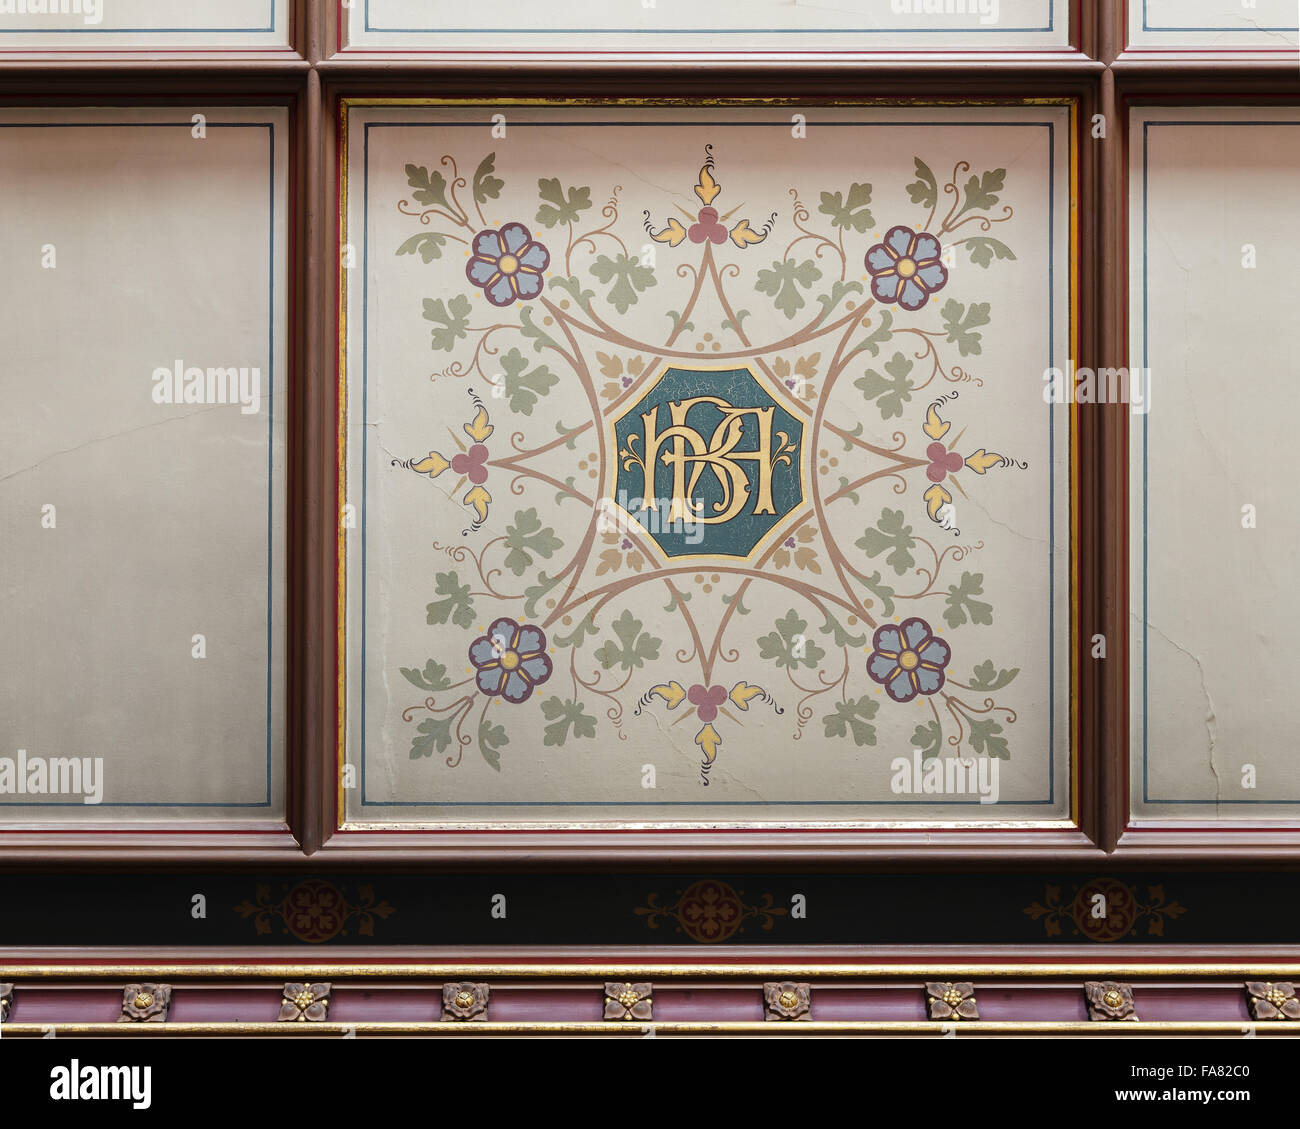 Detail of the decorated ceiling in the West Drawing Room, Oxburgh Hall, Norfolk. Much of the decoration was the work of Sir Henry Paston-Bedingfeld, 7th Bt, and his wife, Augusta Clavering, following their marriage in 1859. Their interlaced initials 'HAB' Stock Photo